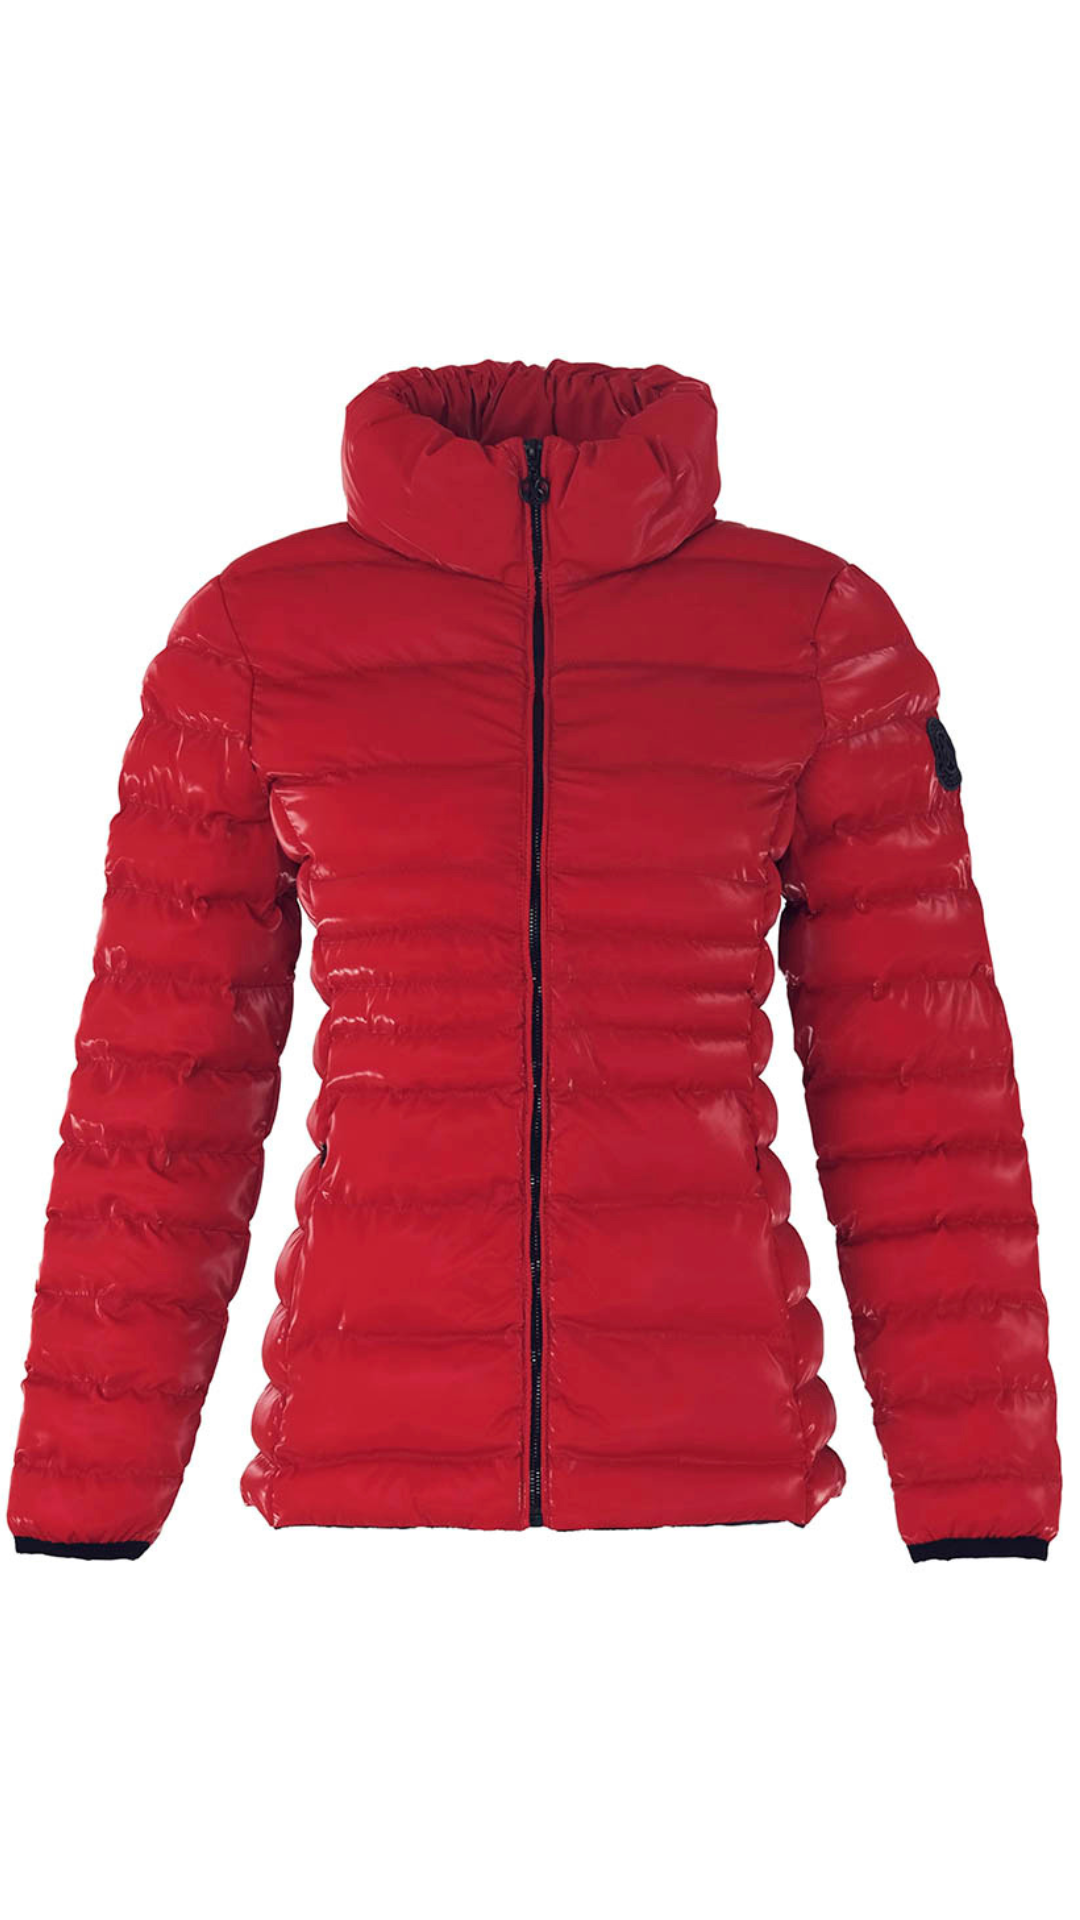 High Collar Shiny Puffer Outerwear in Red or Black. Style DOLC73800